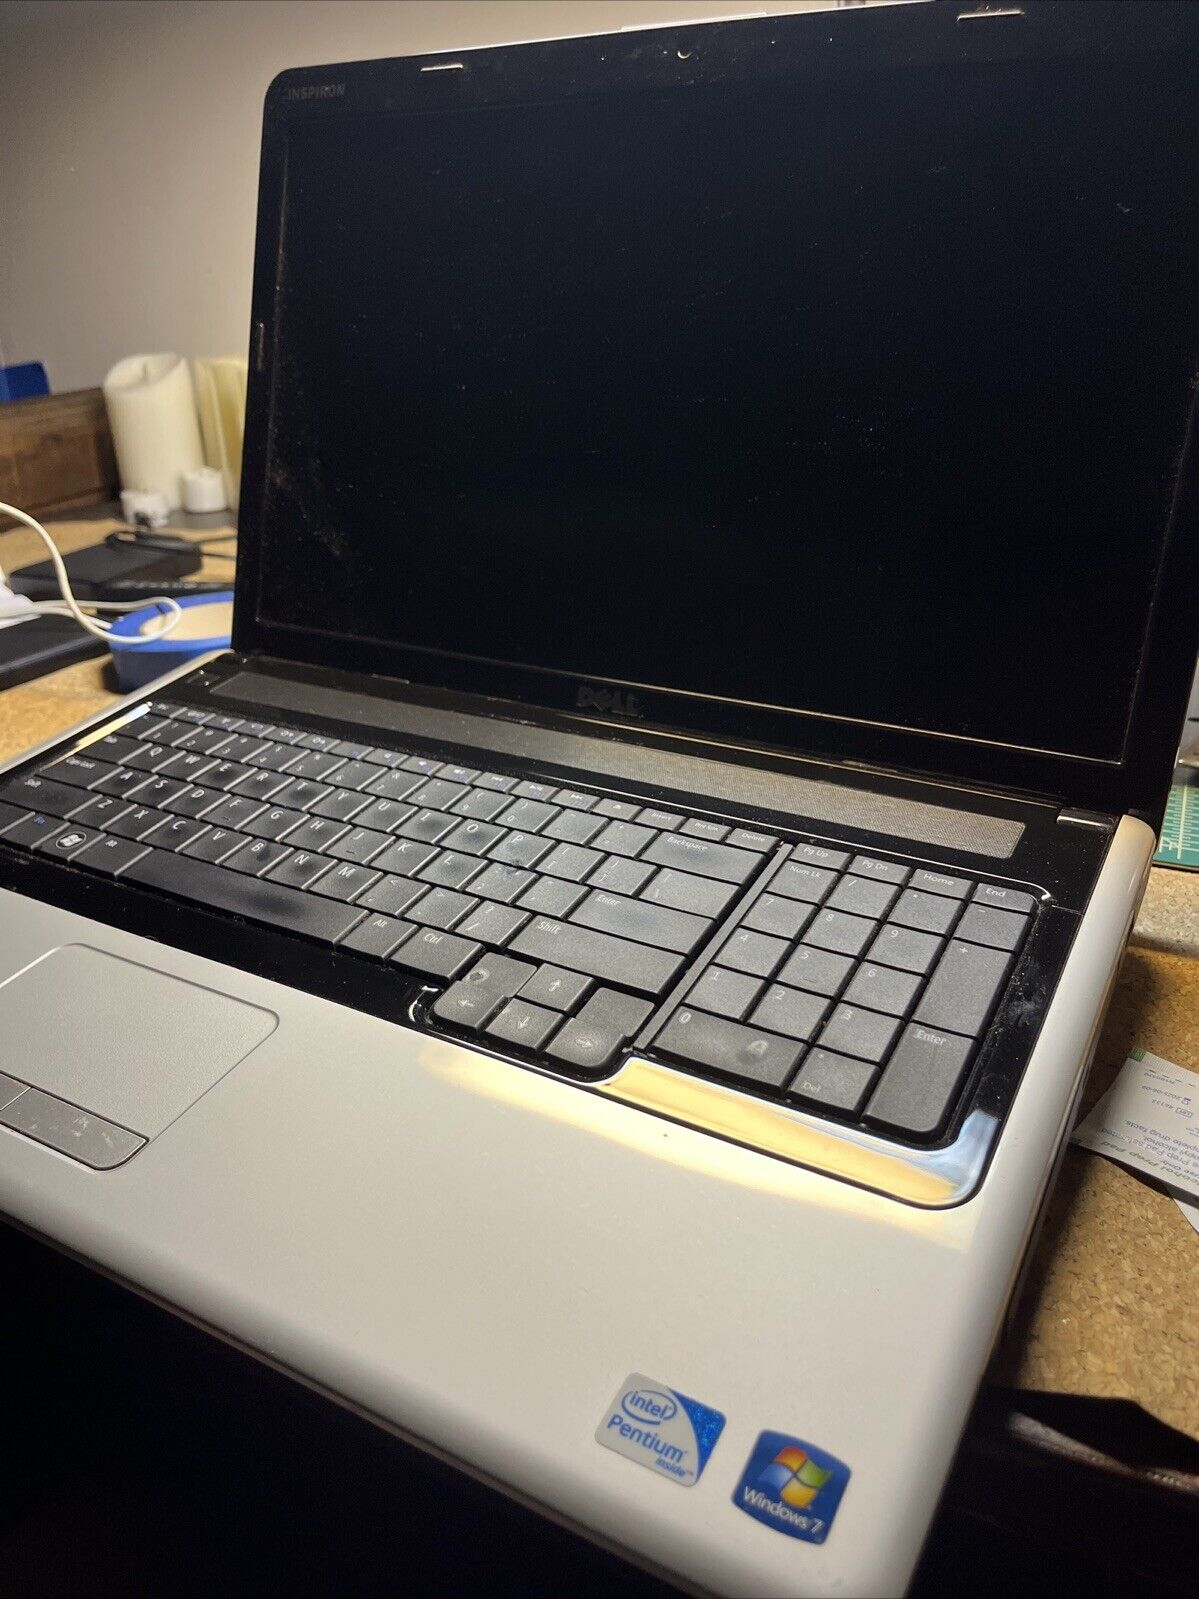 Dell Inspiron 1750 17.3 Not Working - For Parts. Includes Charger And RAM. No OS